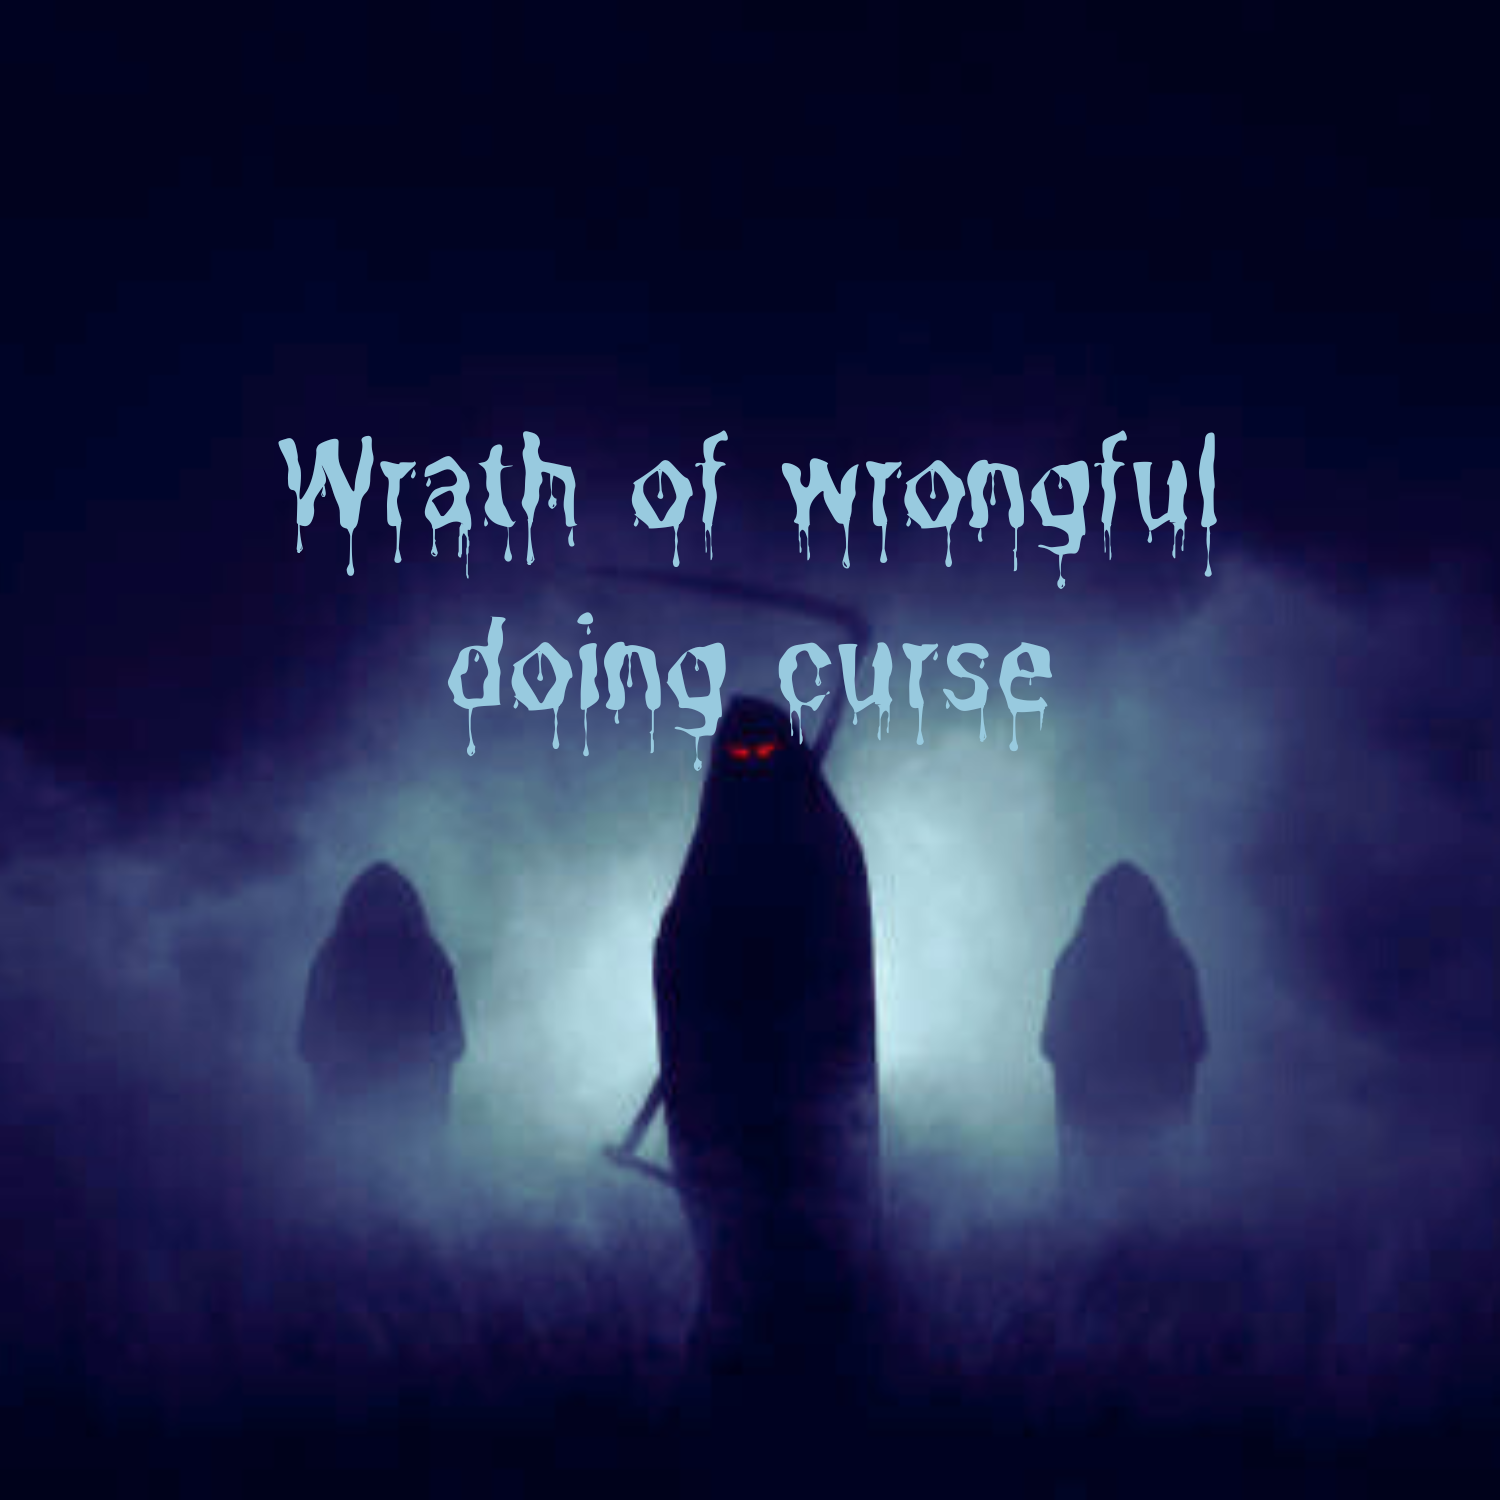 Wrath of wrongful doing curse